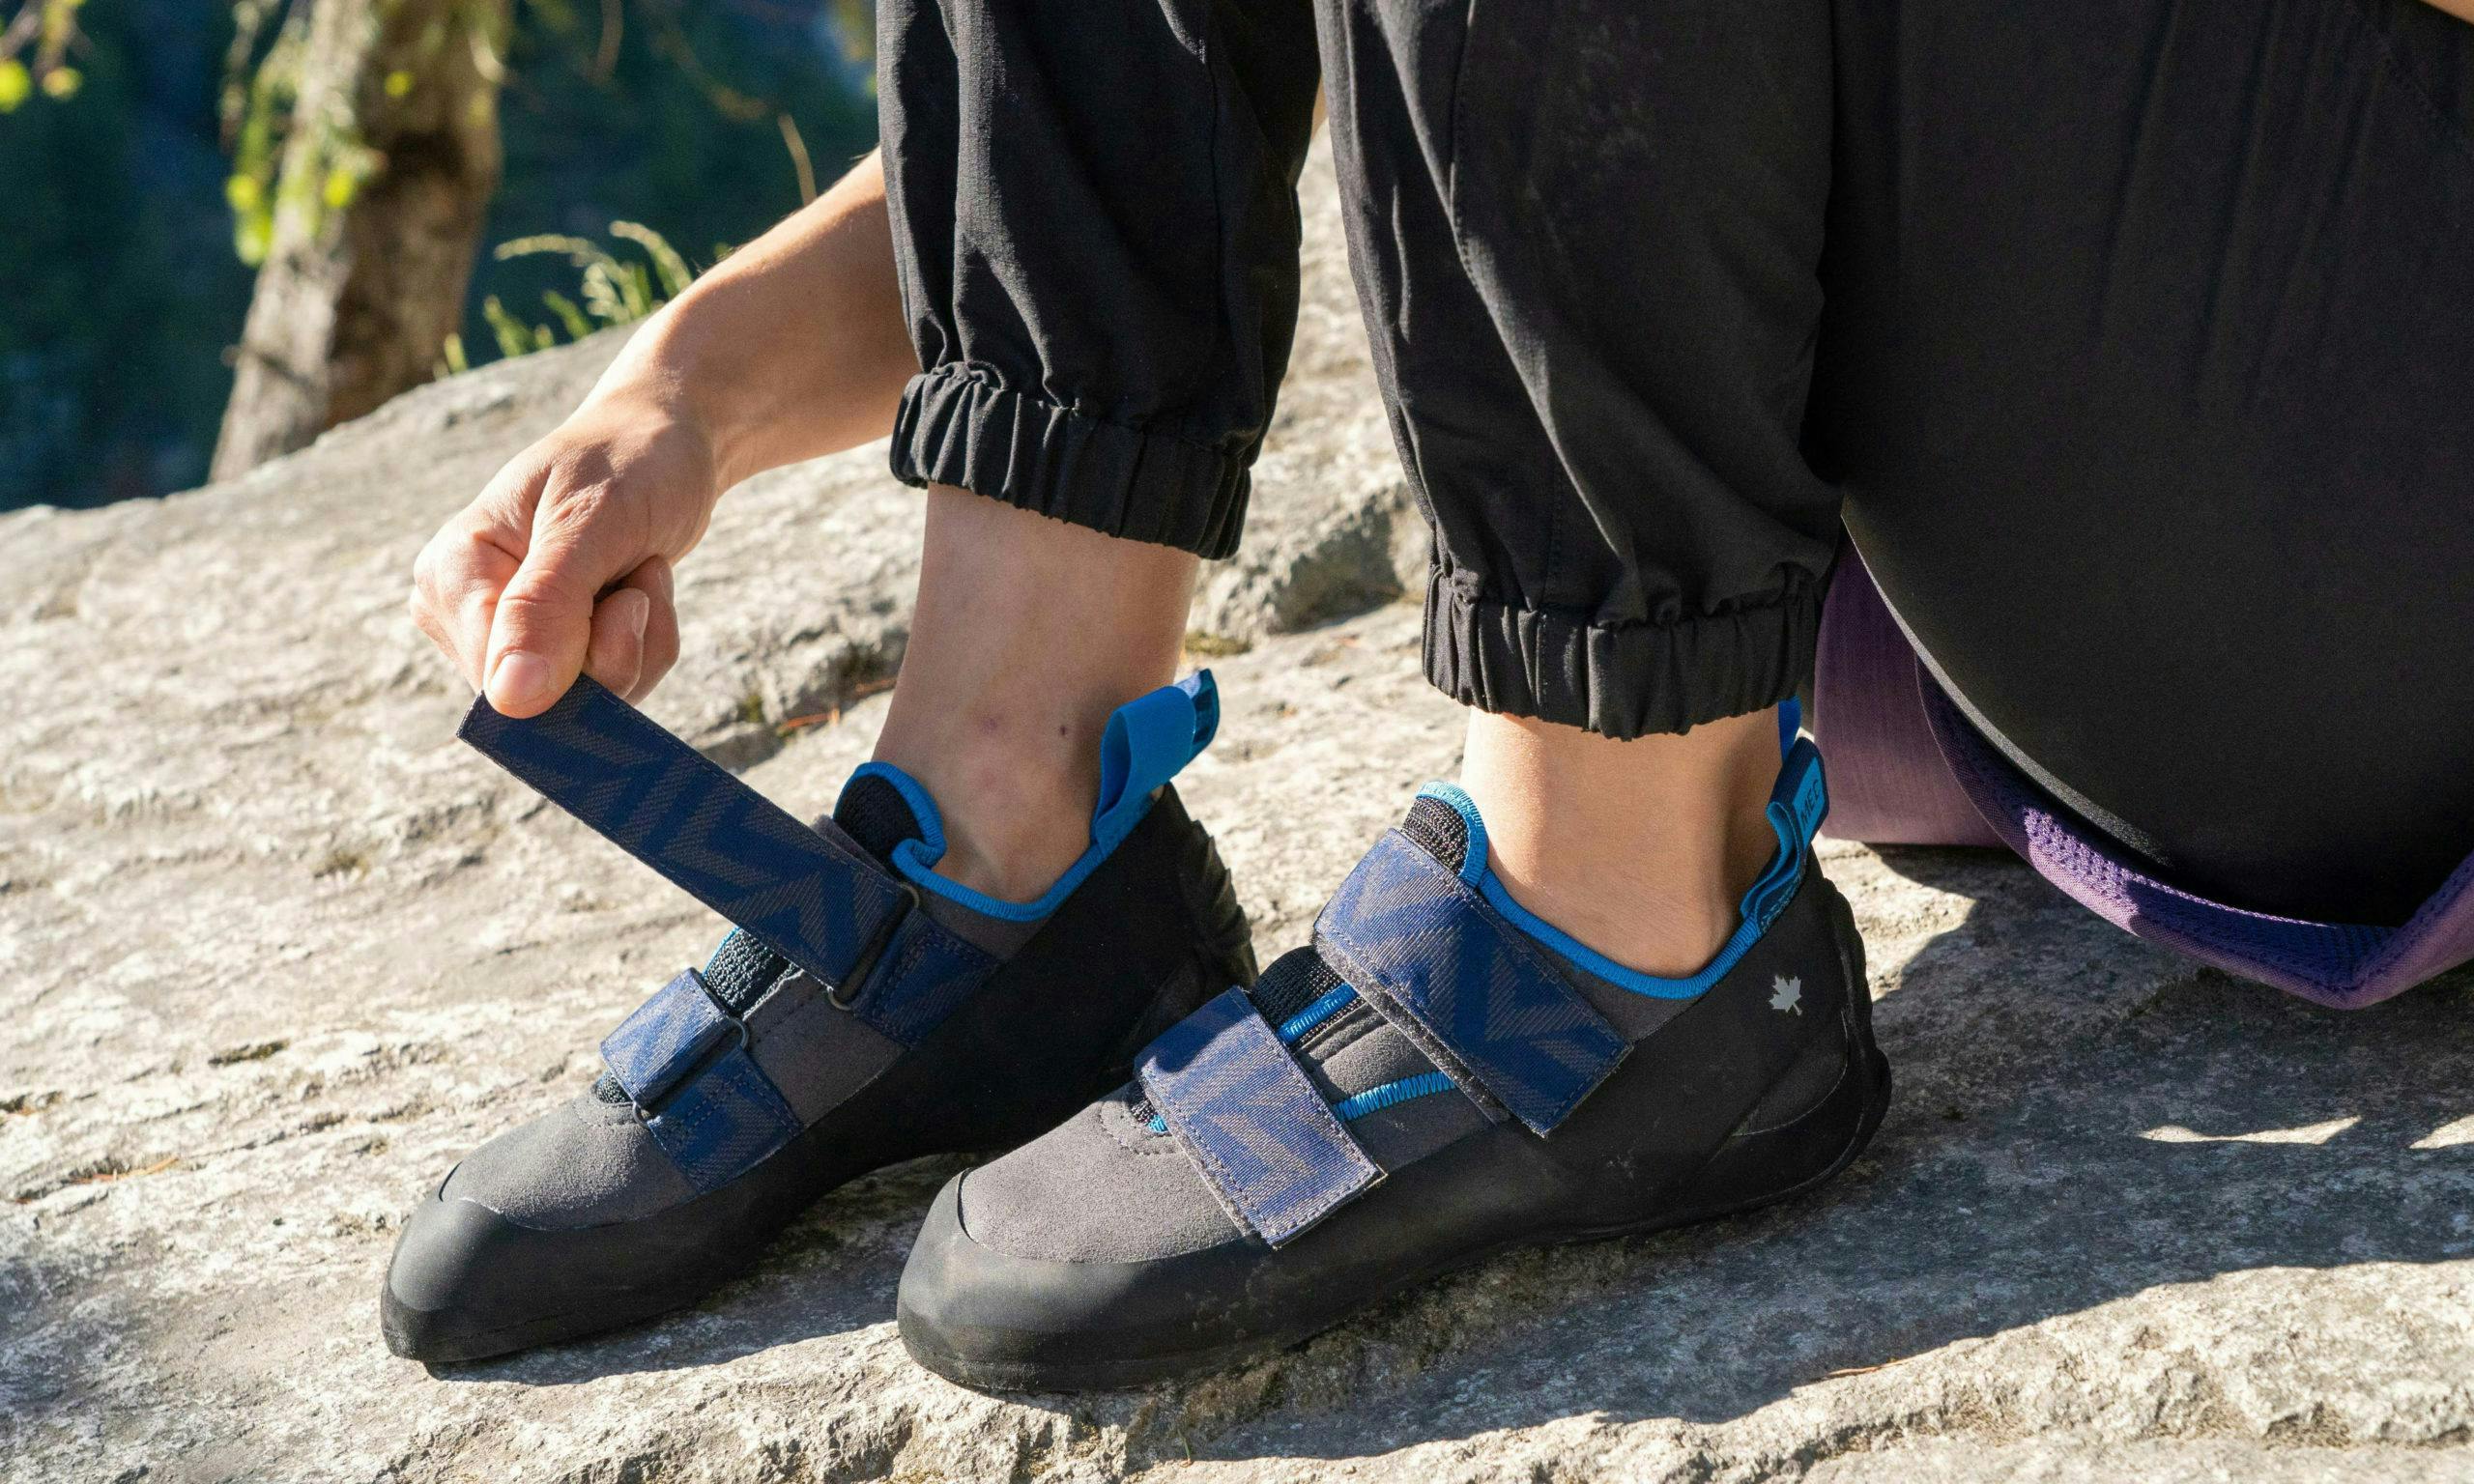 Close up of a person putting on climbing shoes outdoors; the closure on the shoes is Velcro